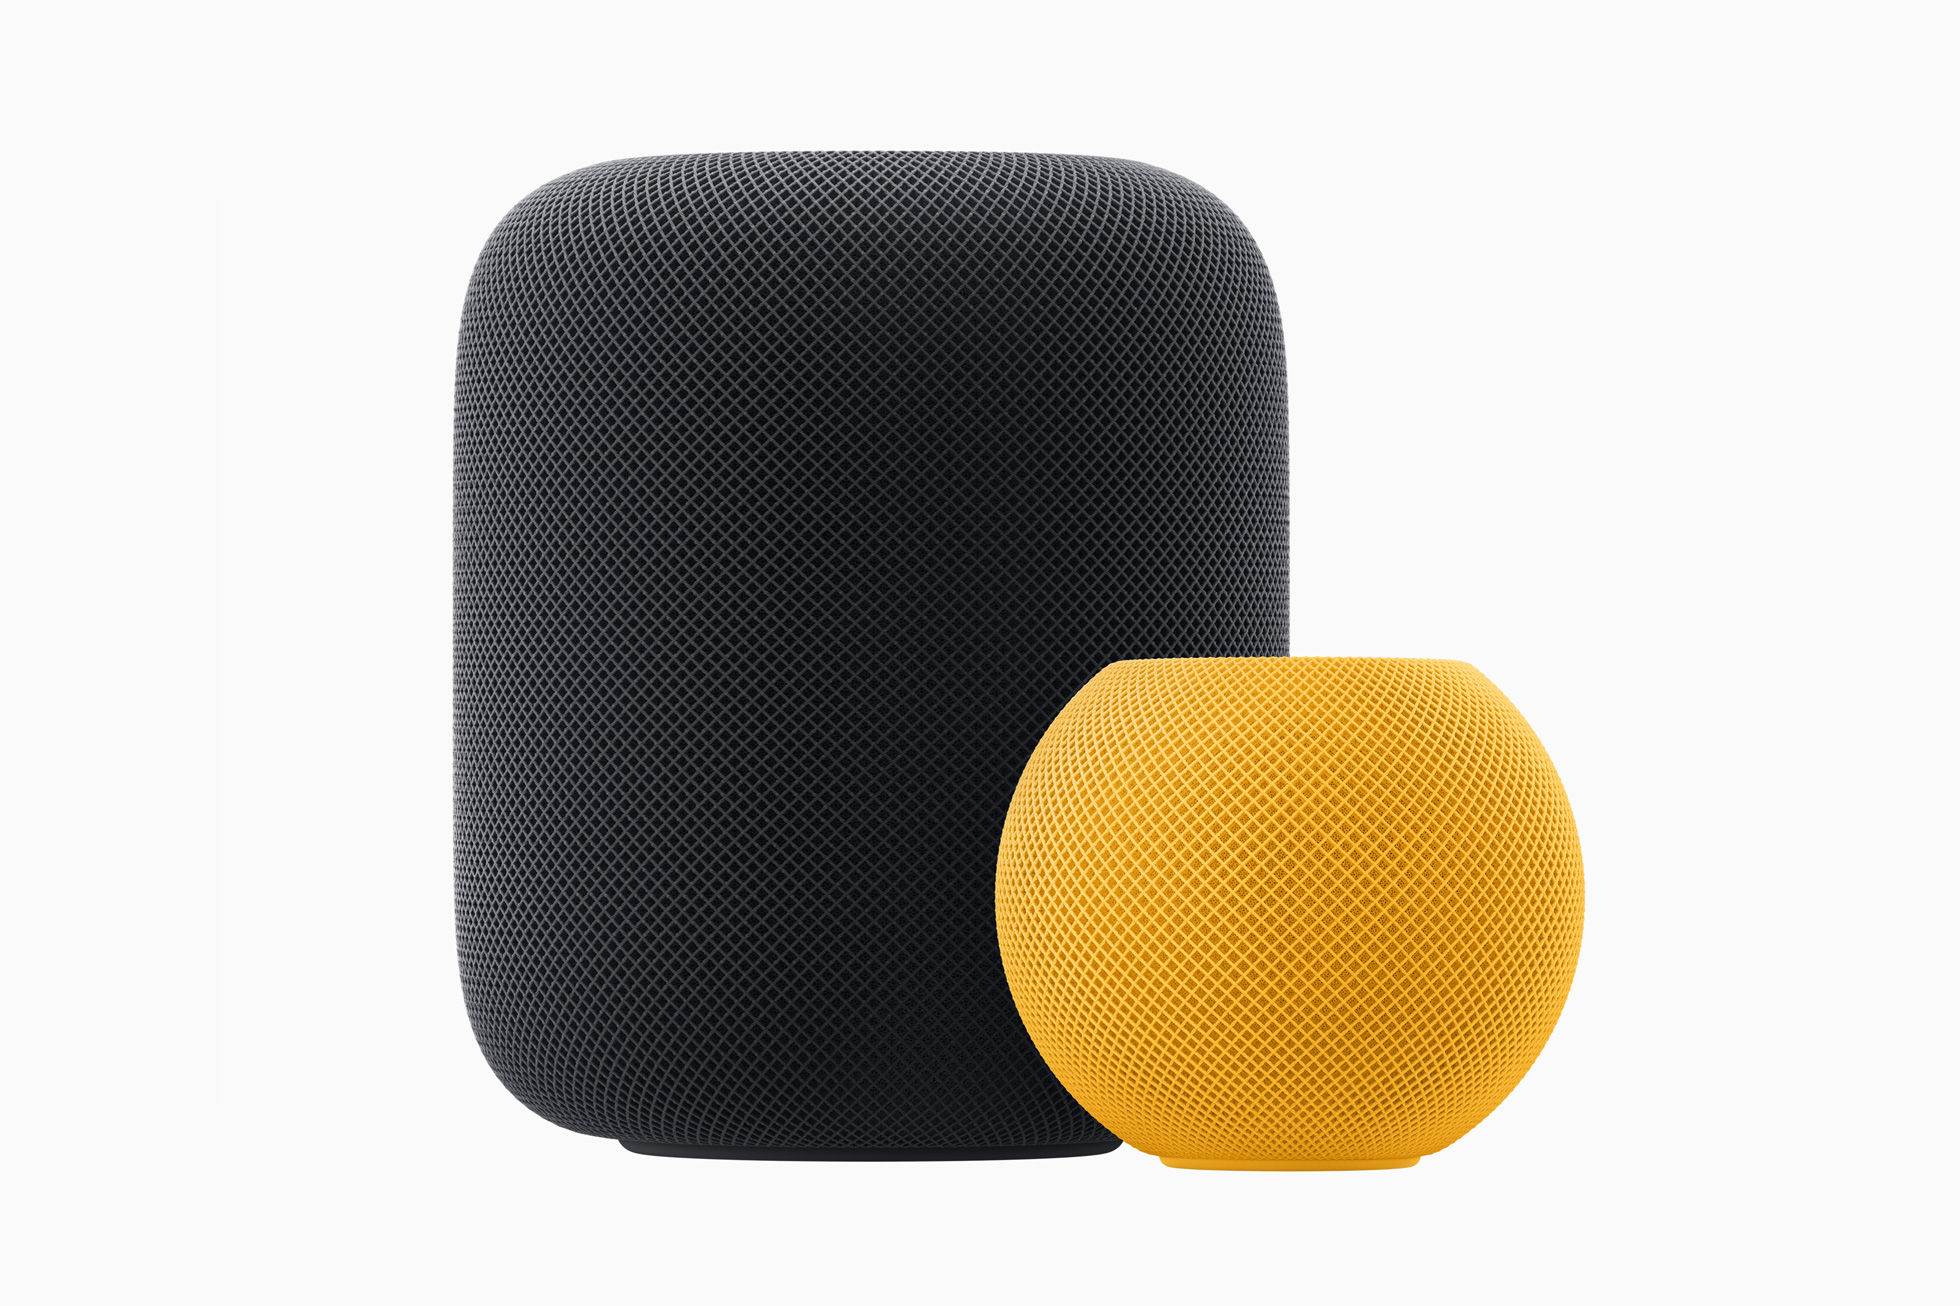 Apple's HomePod mini: Everything You Need to Know